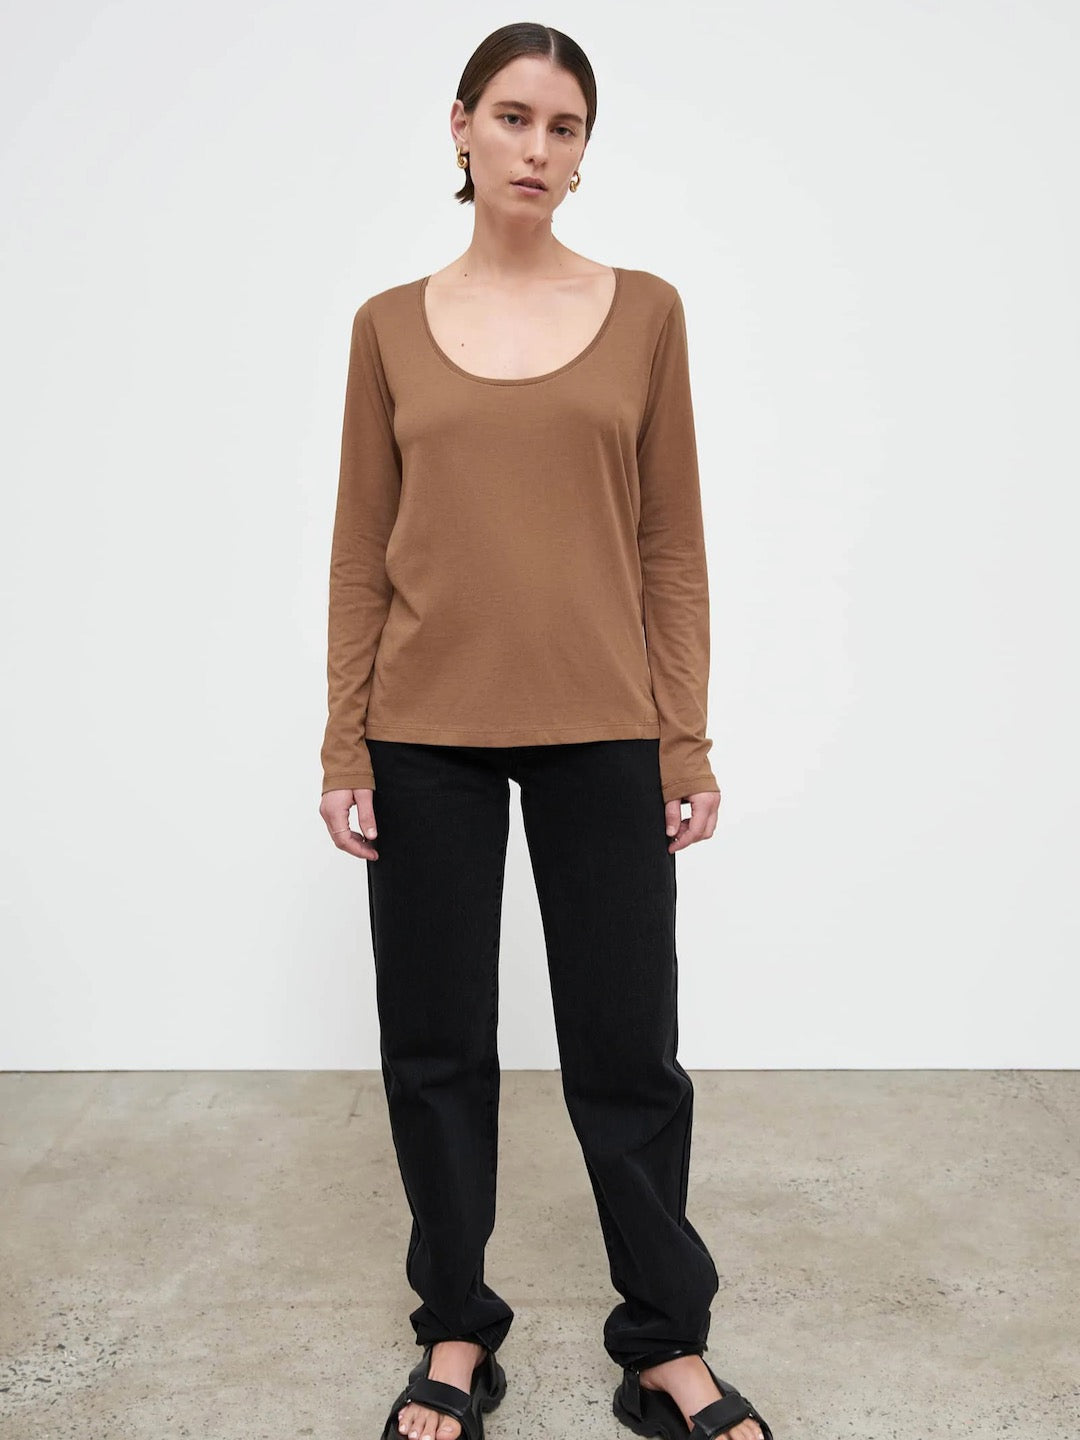 The model is wearing a Ballet Top - Earth by Kowtow and black pants.